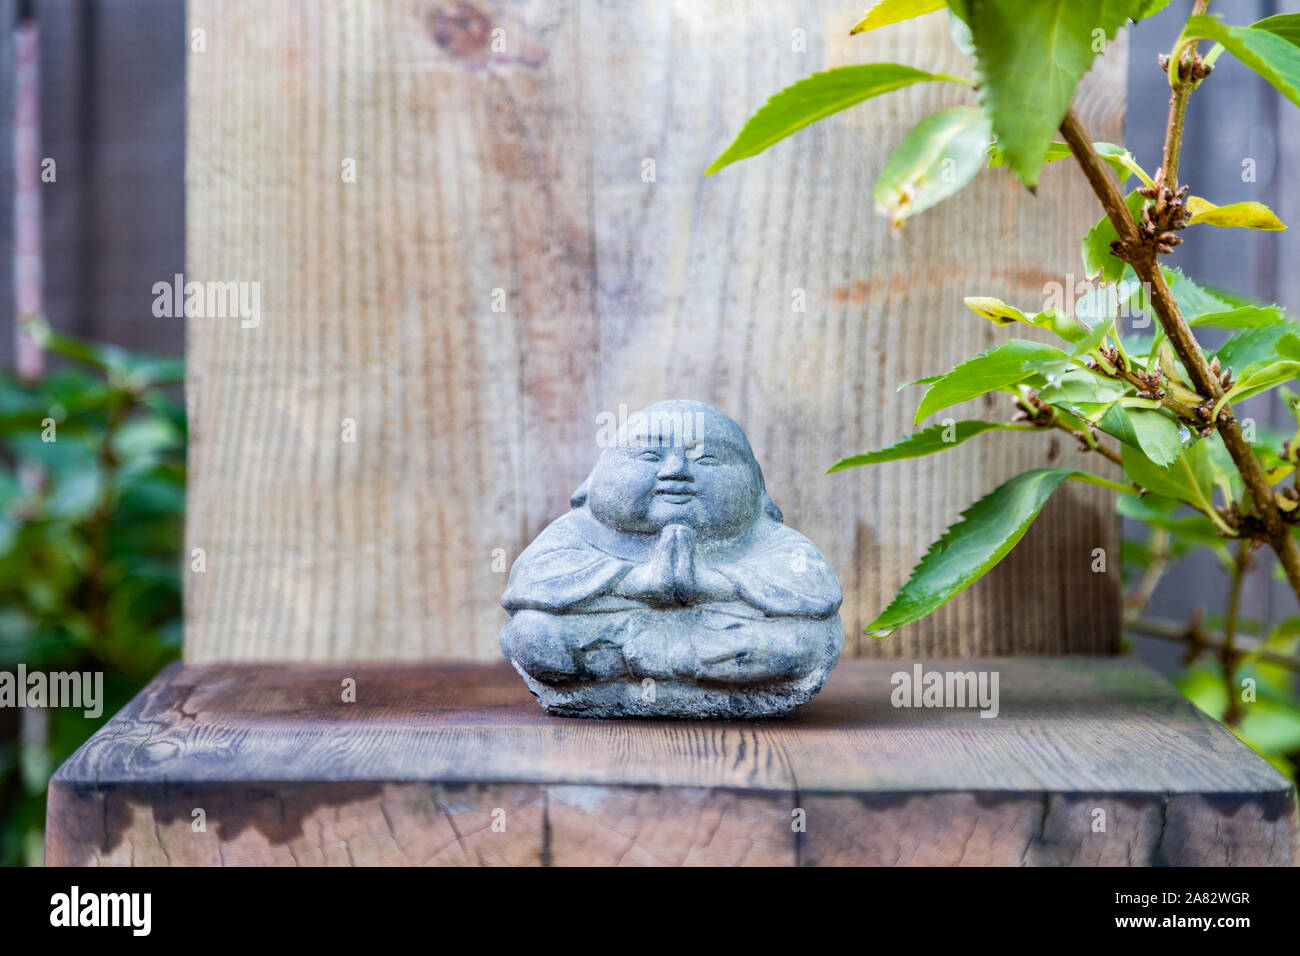 Thai style stone Buddha with praying hands in a zen setting Stock Photo